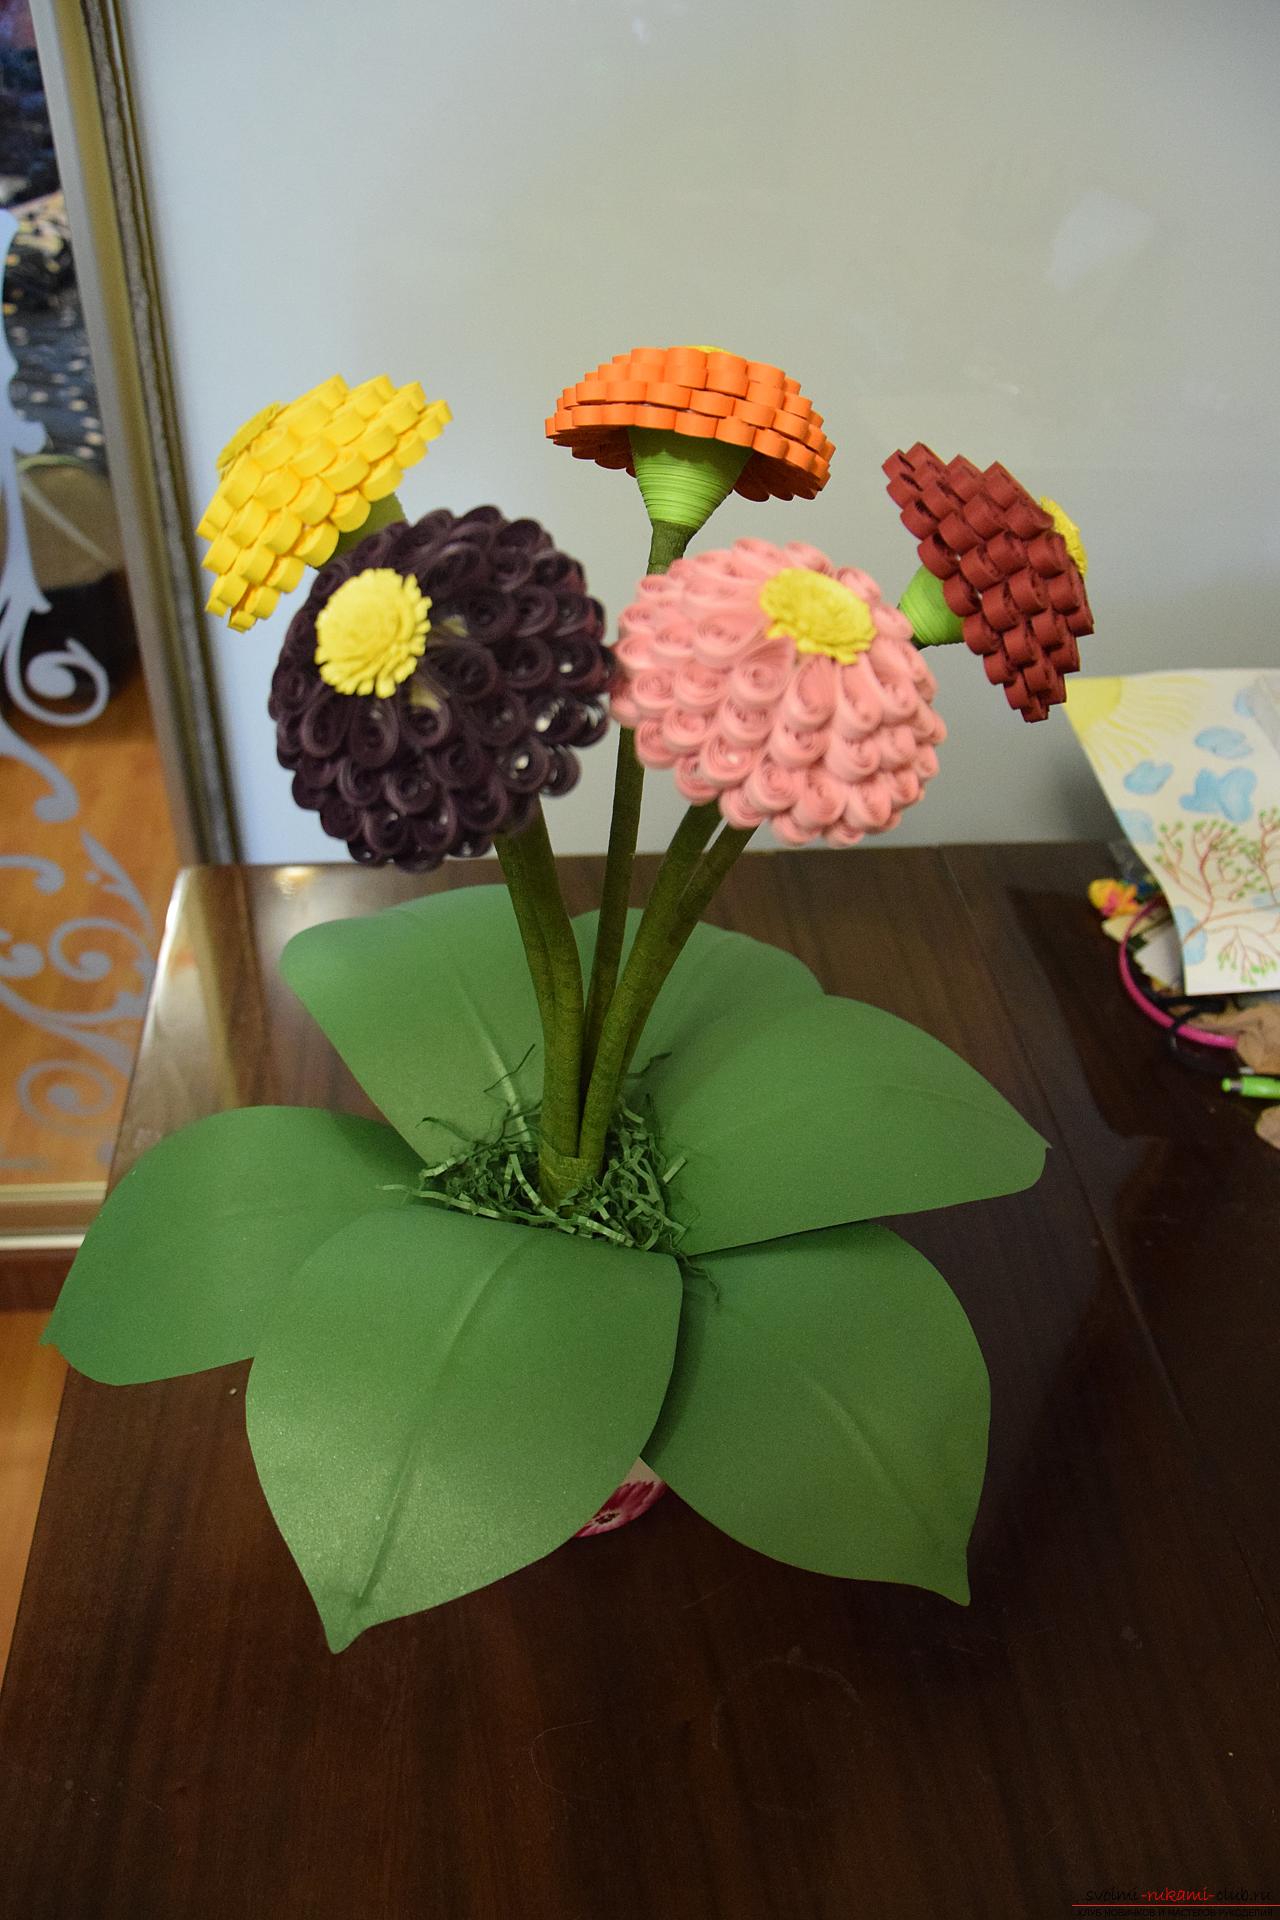 Three-dimensional flowers from quilling. Photo # 2